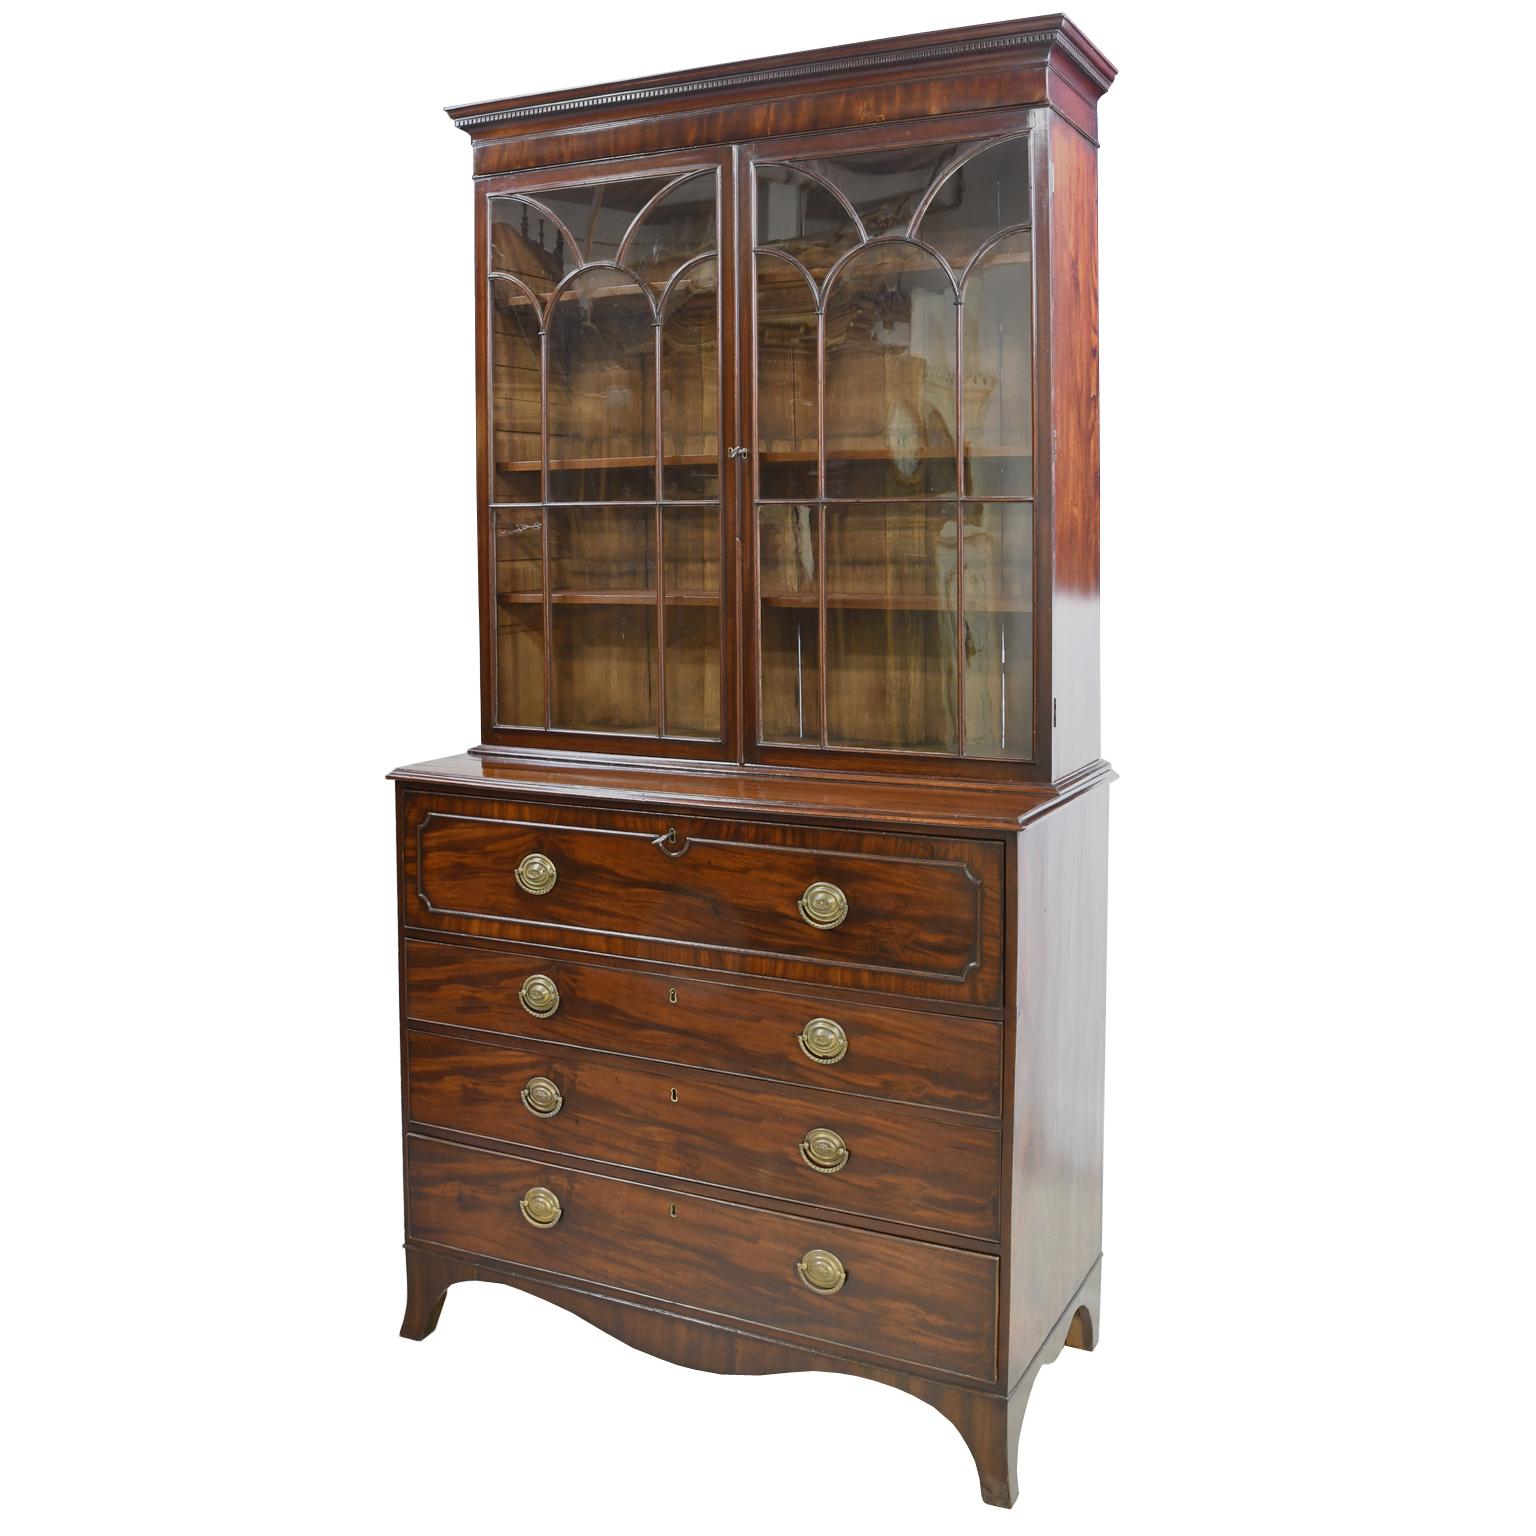 A stately George III secretary bookcase in fine, figured mahogany with inlaid mahogany banding on pull-out, drawer-front secretary. England, circa 1810. Bookcase is set back & has three adjustable shelves, with glazed doors that are decorated with a